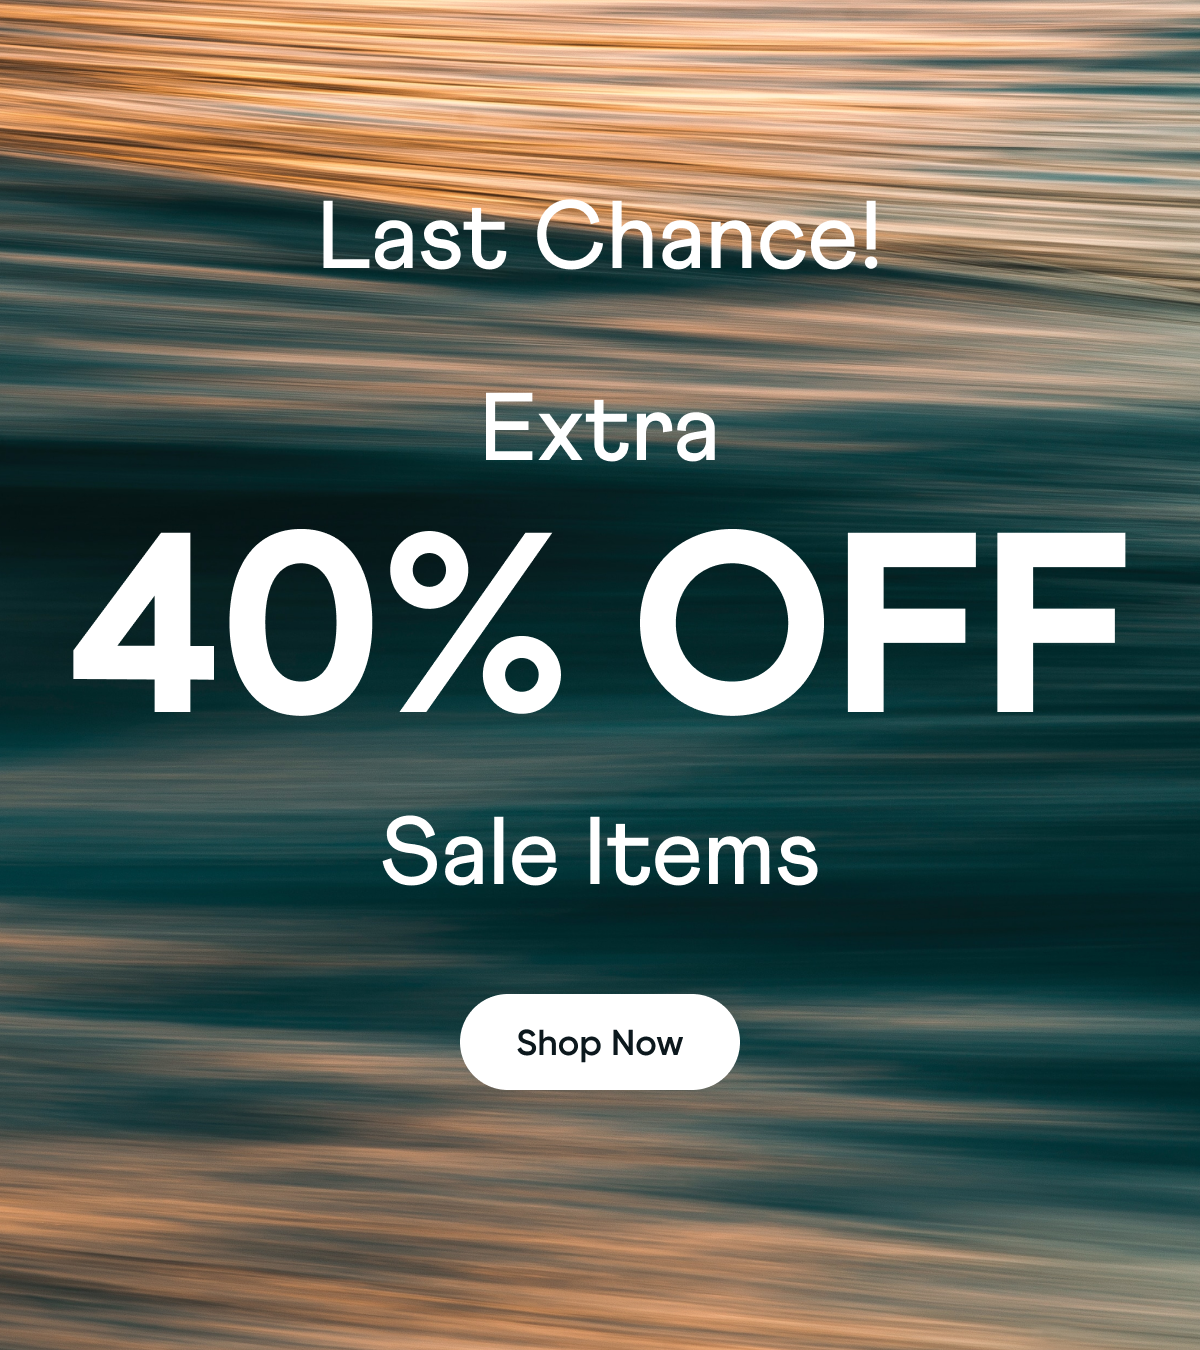 Last Chance! Extra 40% off Sale Items